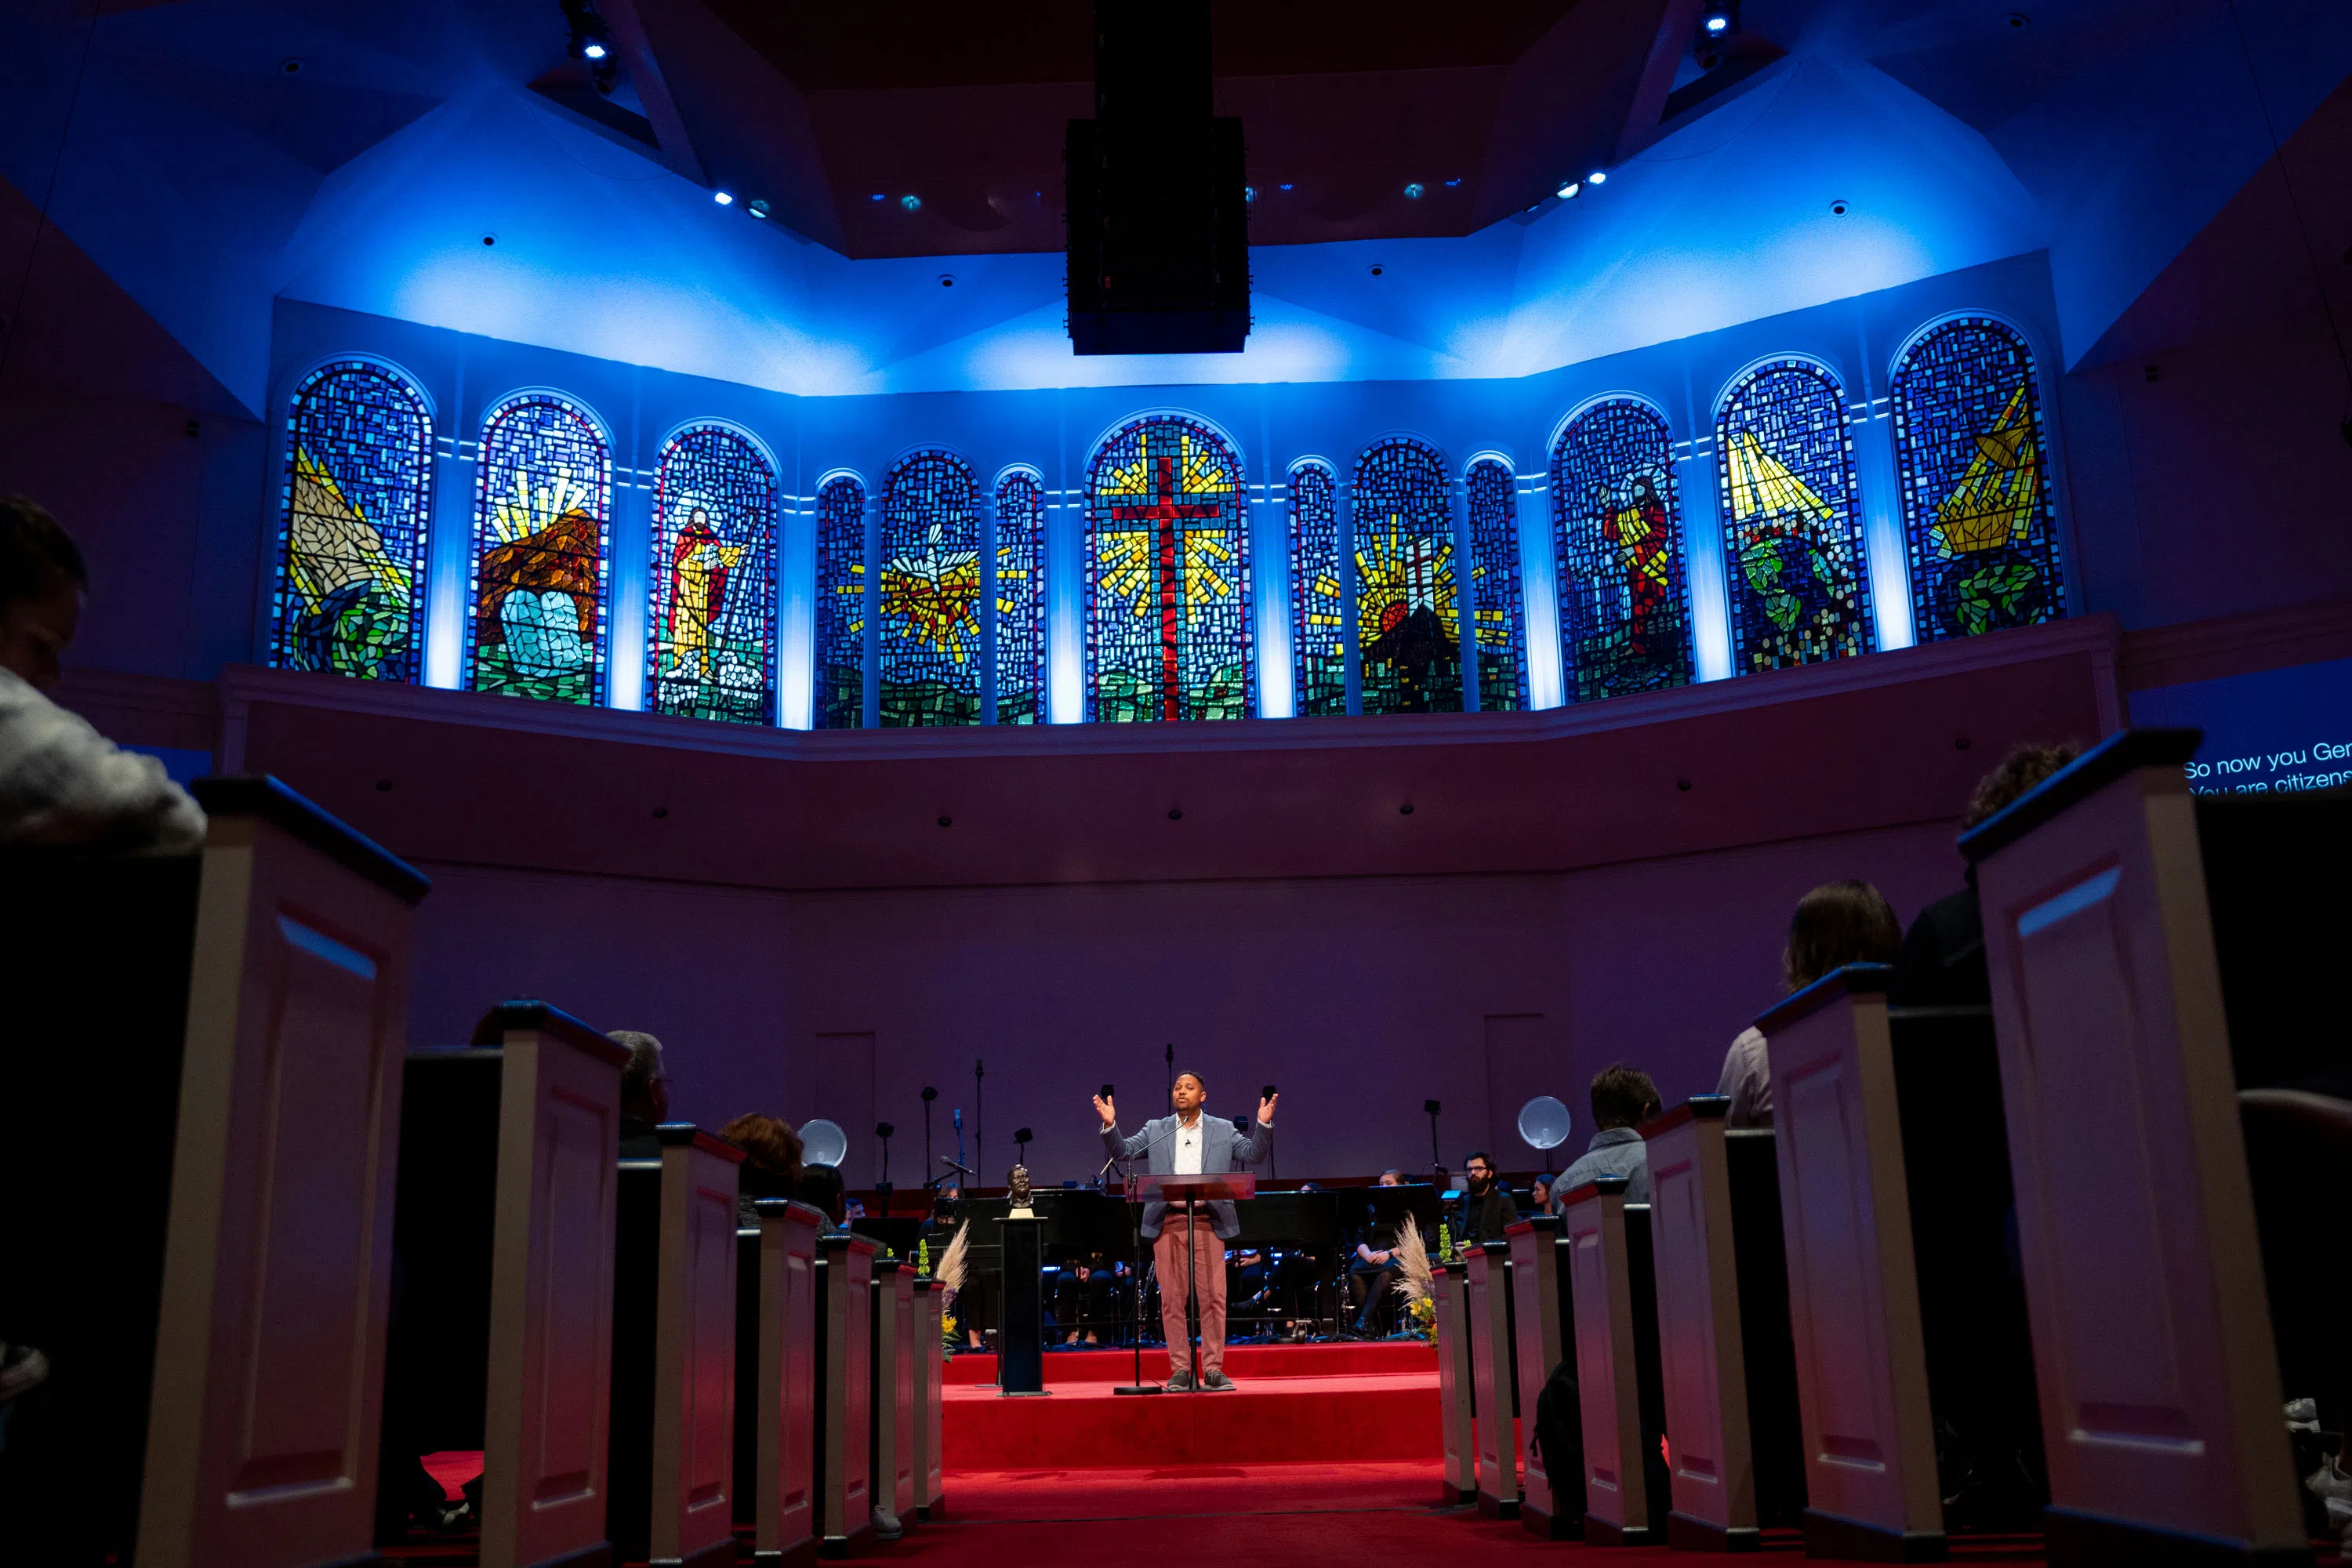 Chapel at College Church of the Nazarene